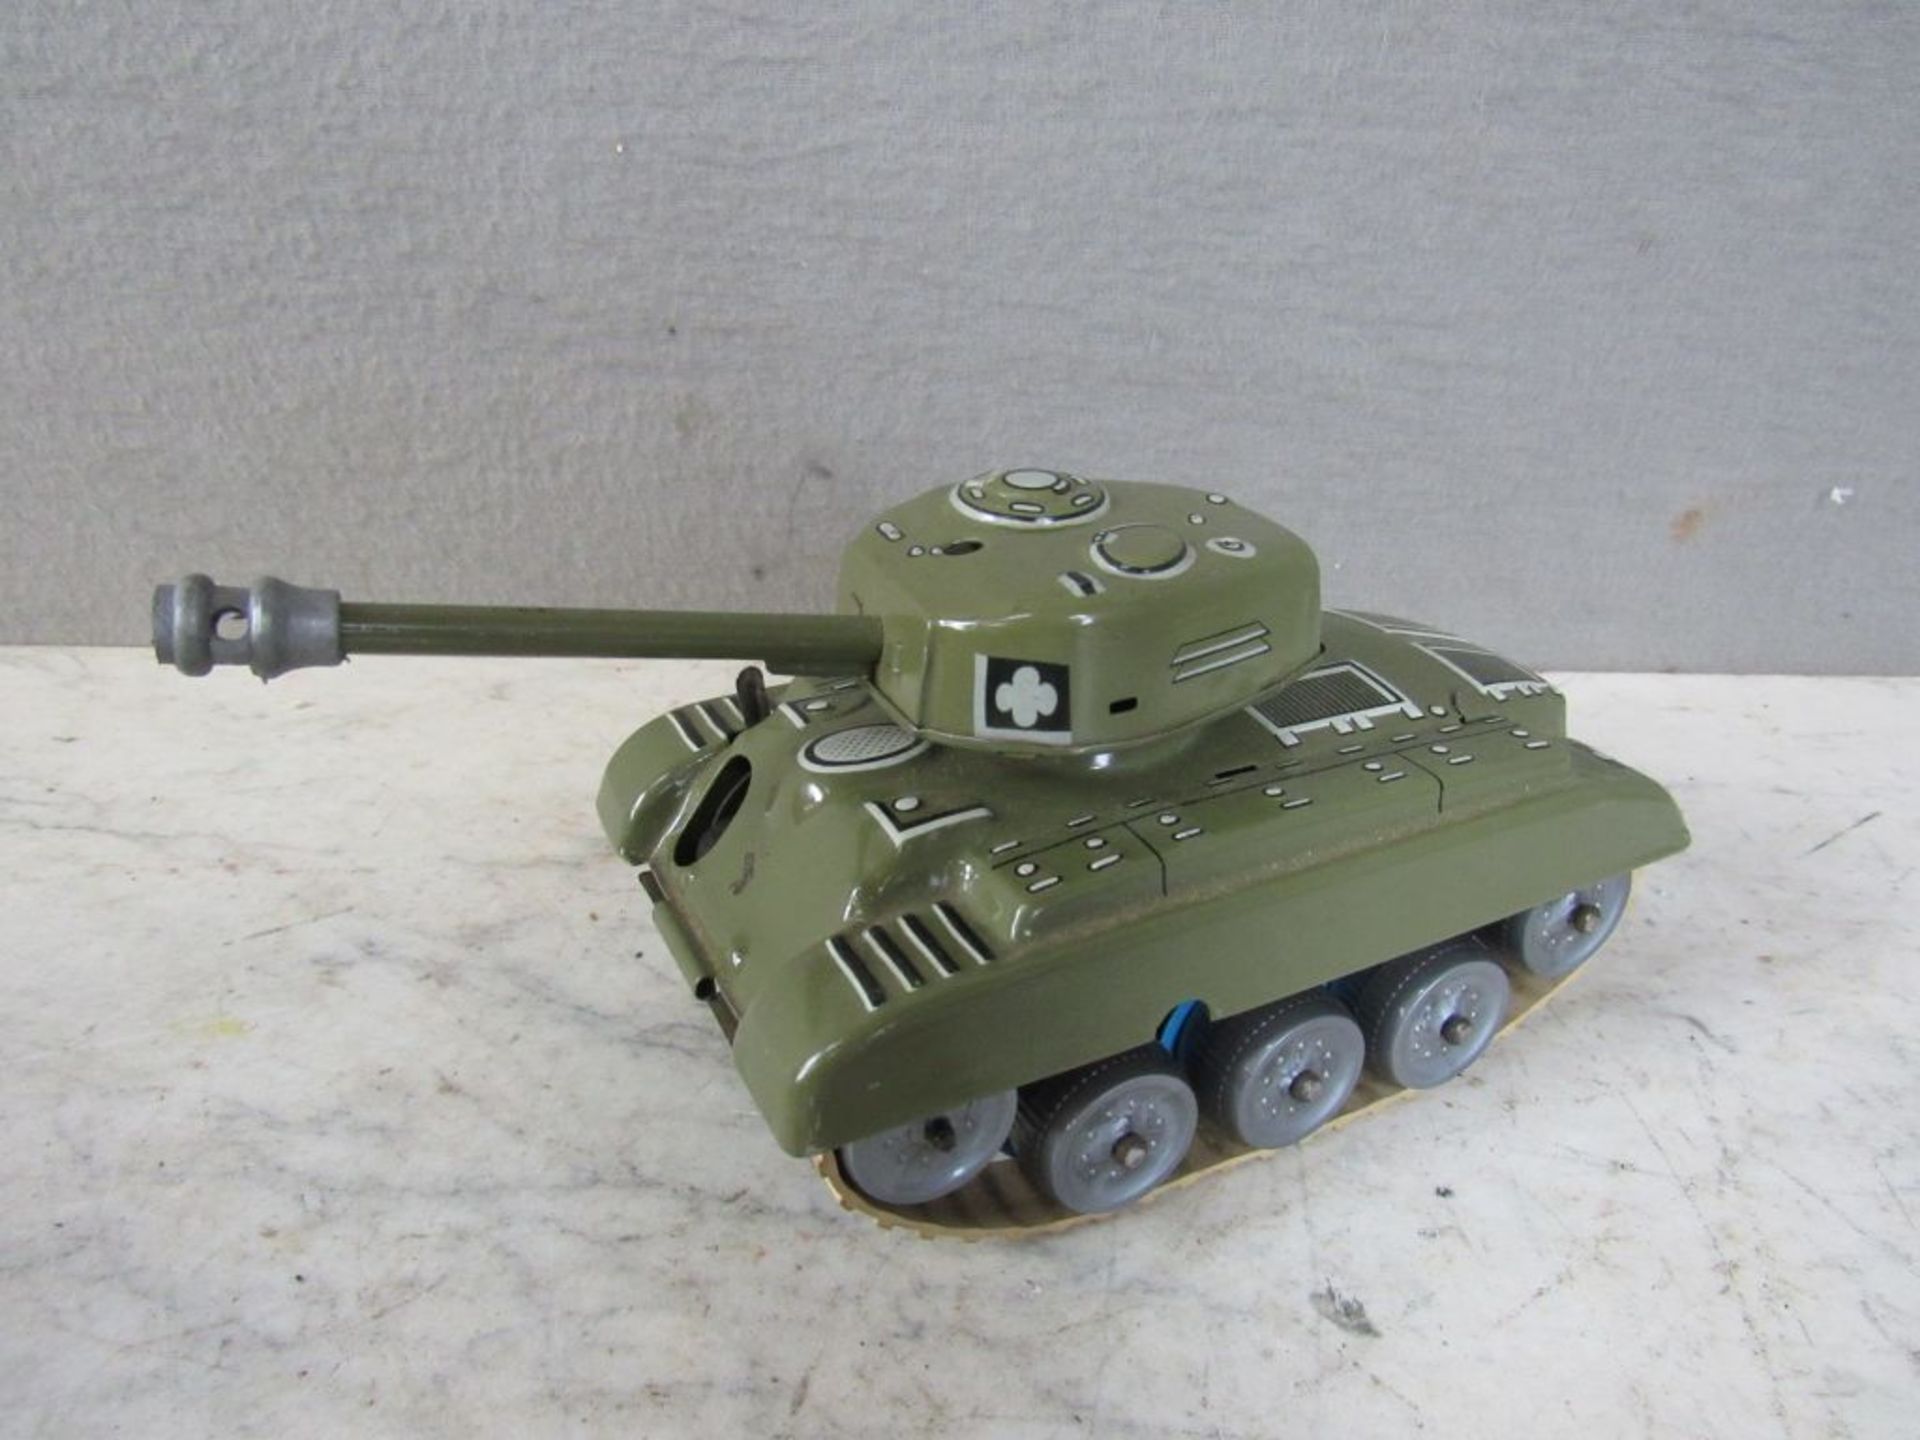 Blechspielzeug Panzer Gama Modell 984 - Image 8 of 10